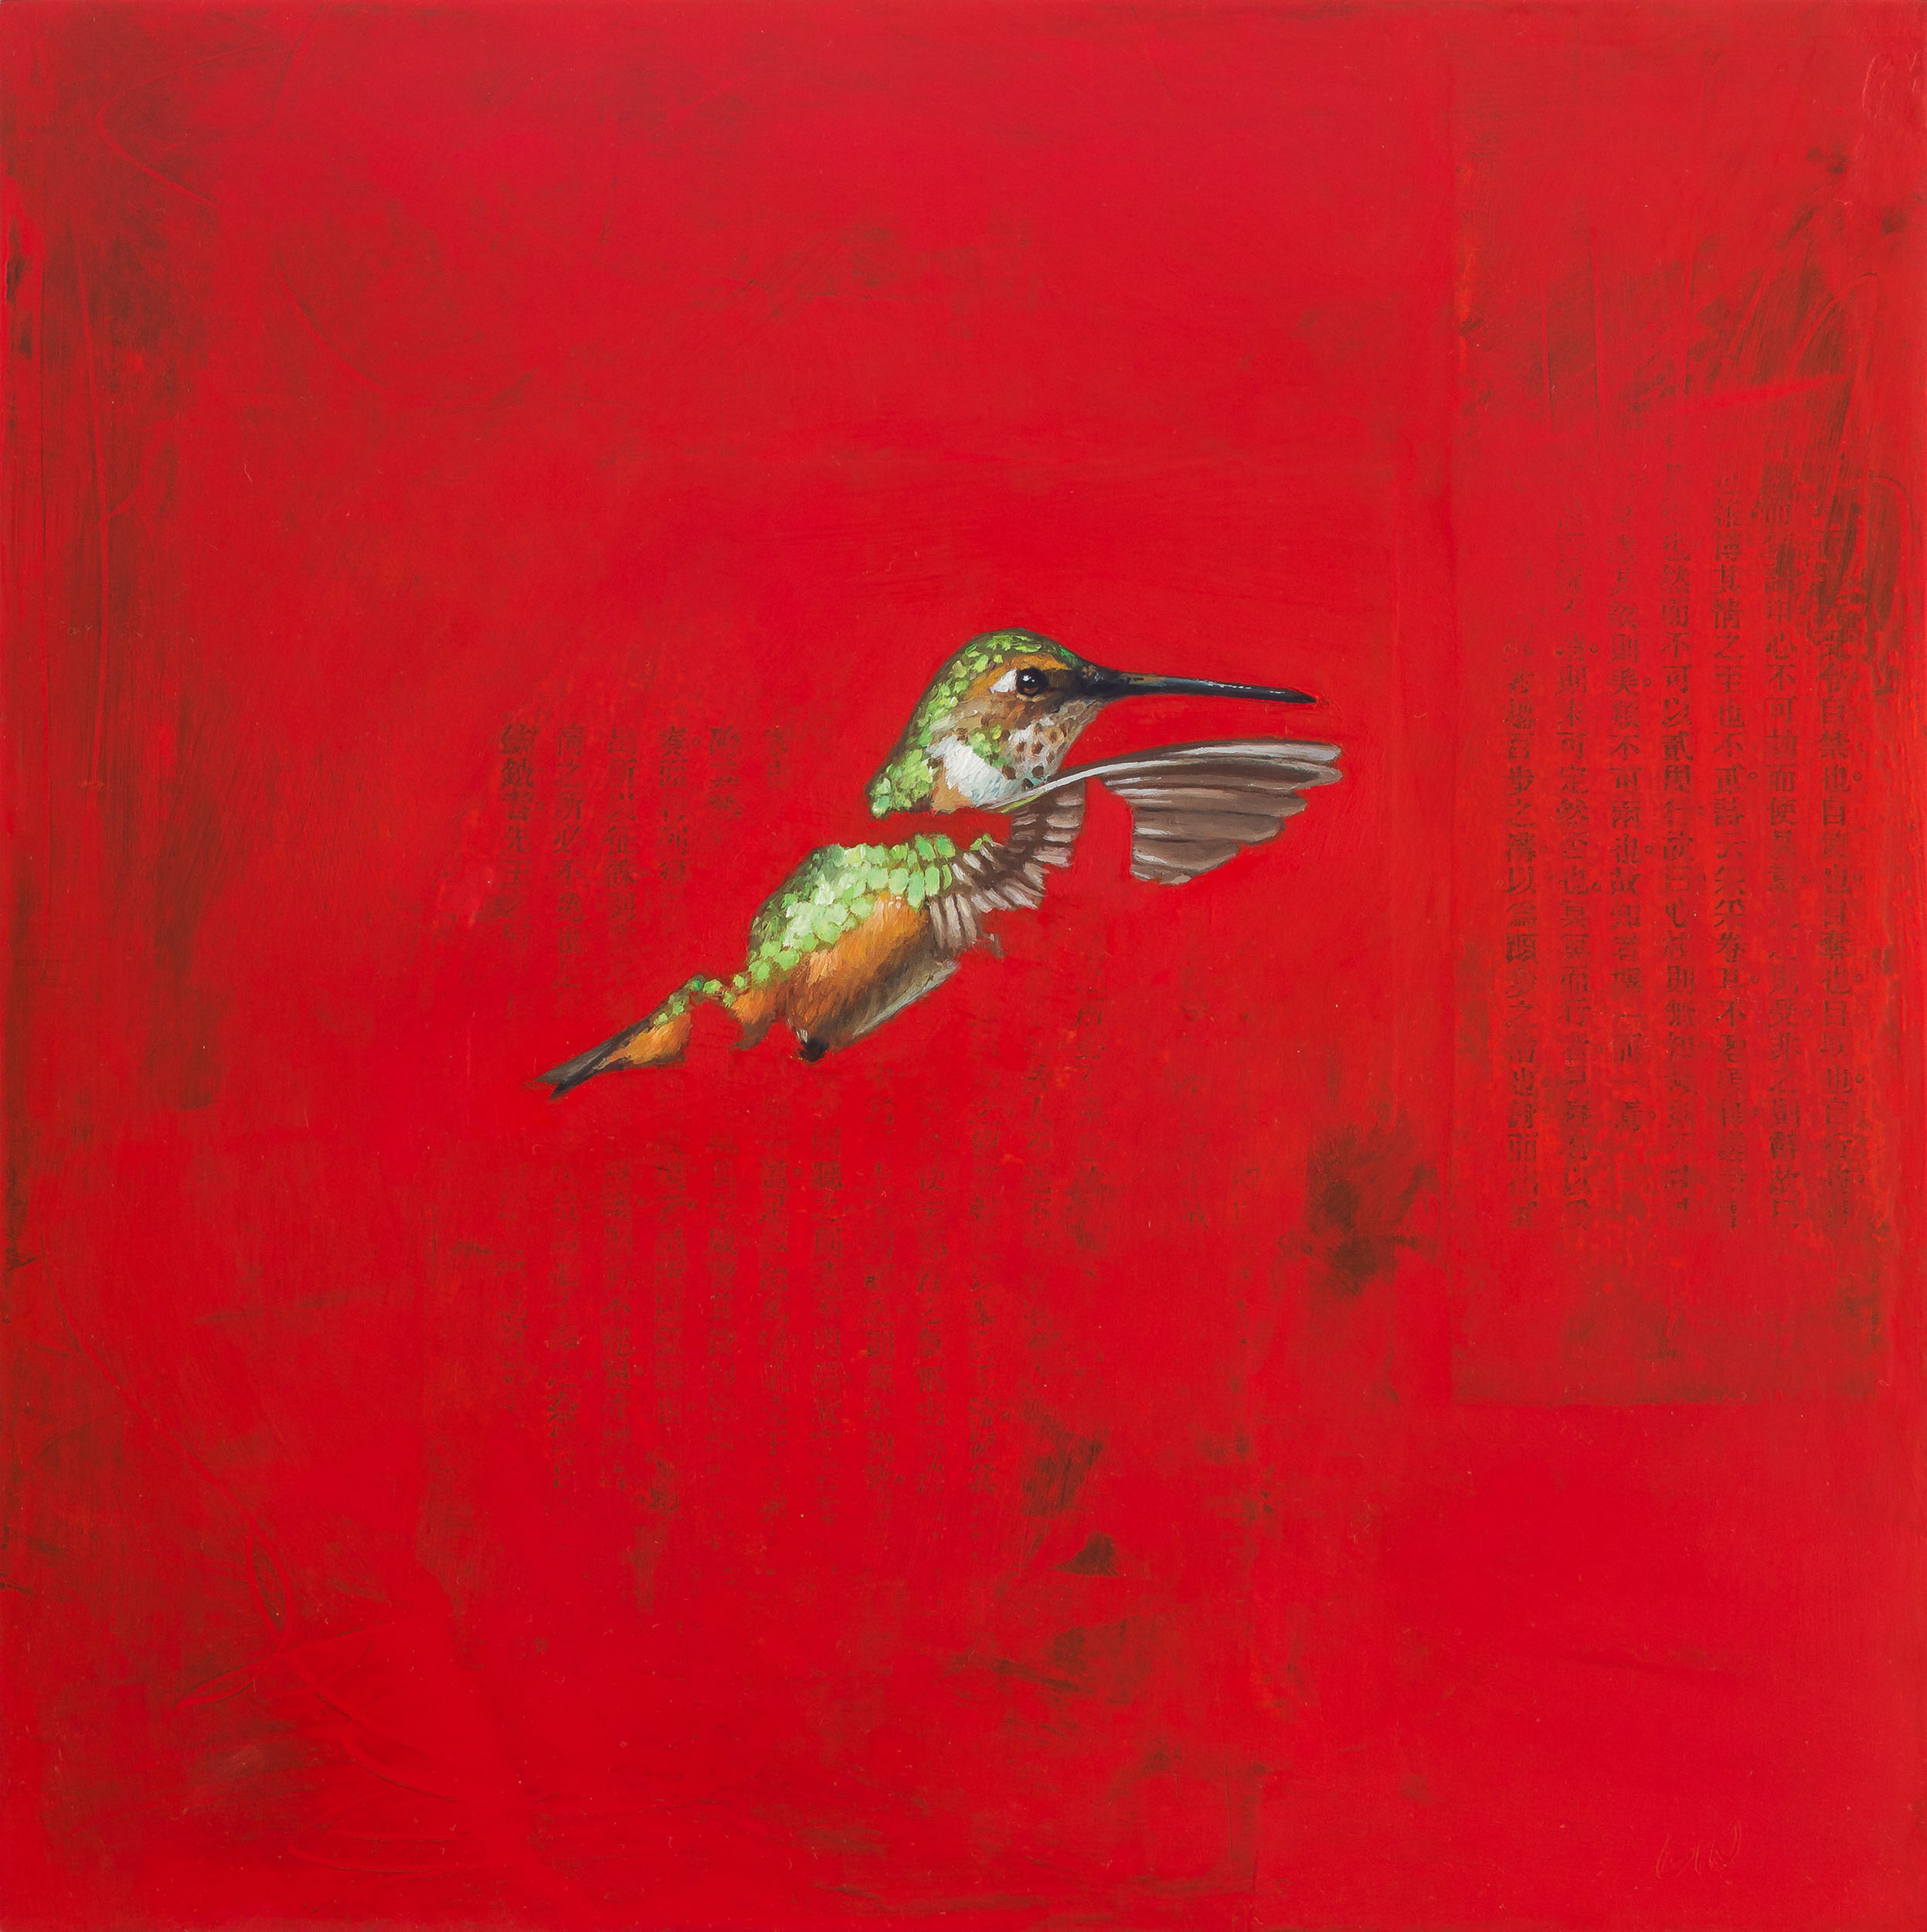   Allen’s Hummingbird  2019 oil and collage on panel 10 x 10 inches  Private Collection 